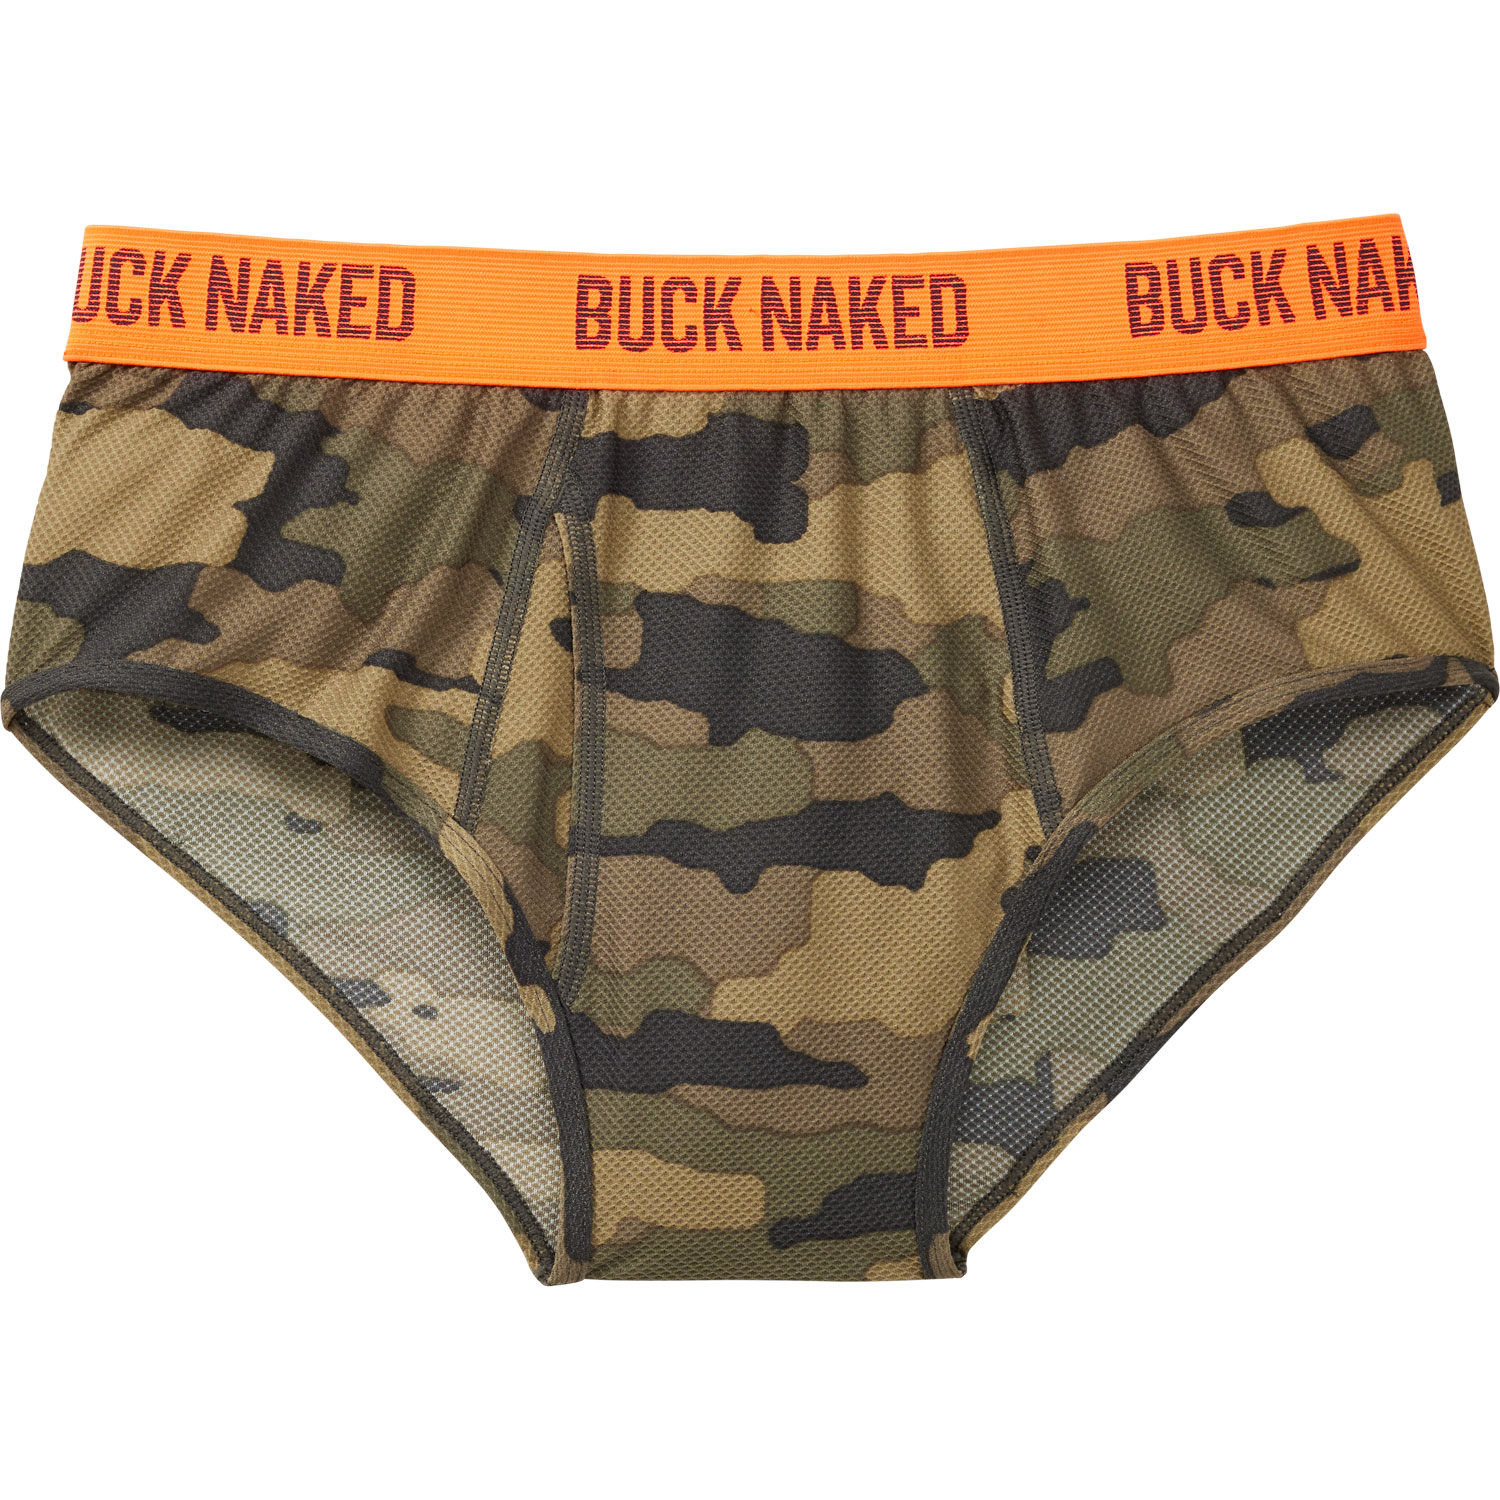 Duluth Trading Co. Women's Duluth Trading Co. Gold Green Bay Packers Cheese  Buck Naked Performance Briefs, Fan Shop